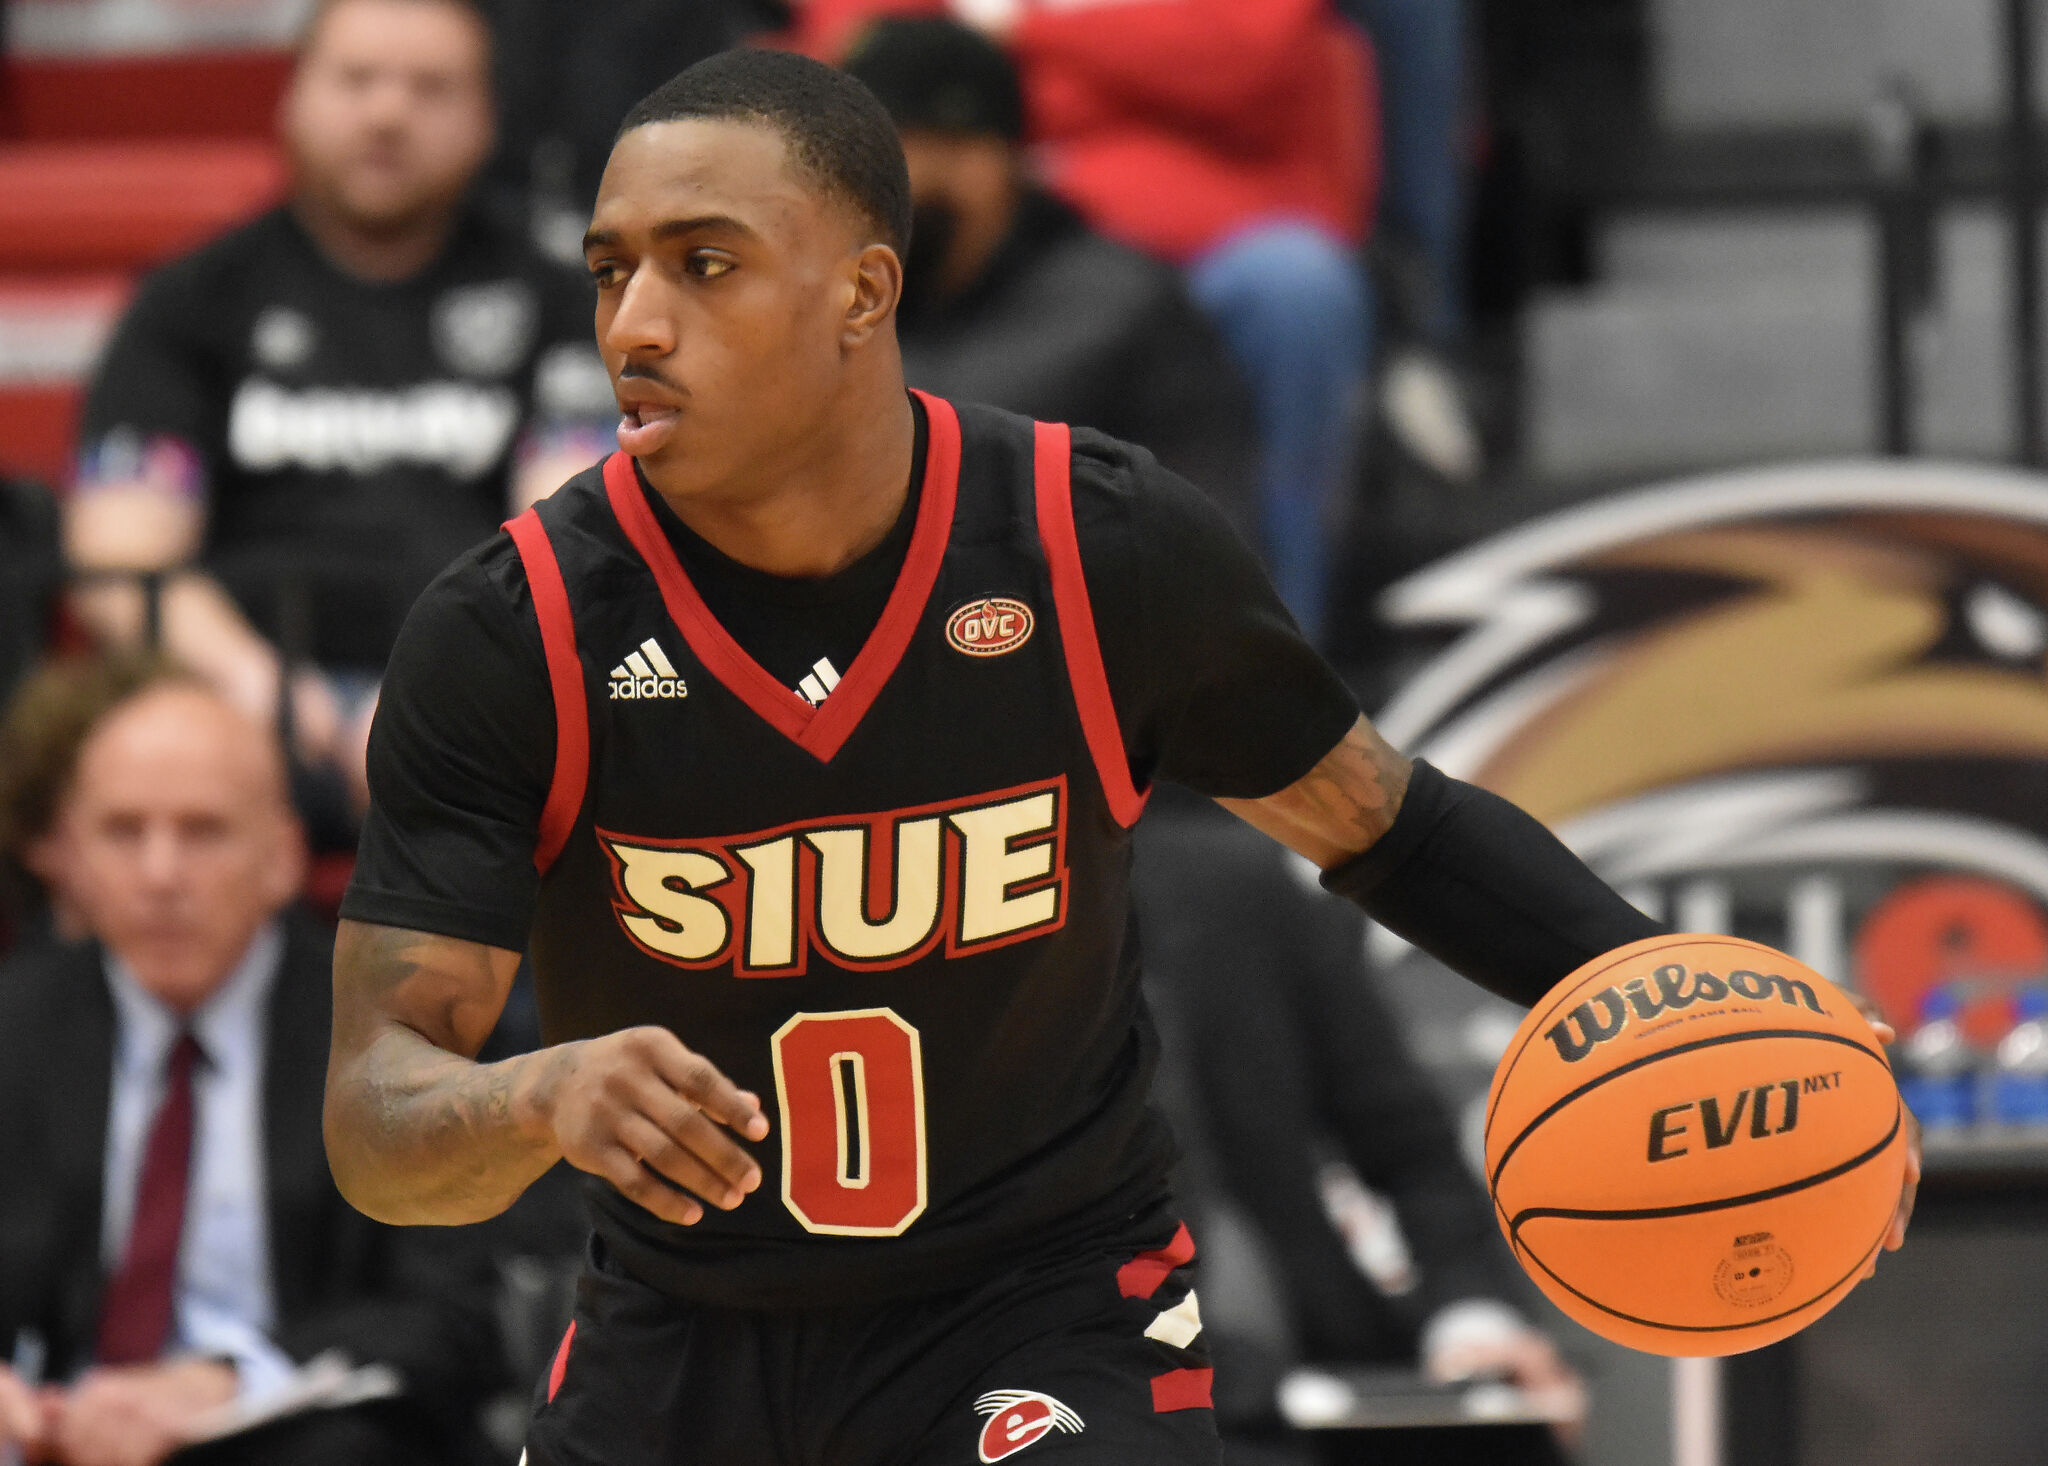 SIUE continues to roll; breaks program Division I win record – The Edwardsville Intelligencer